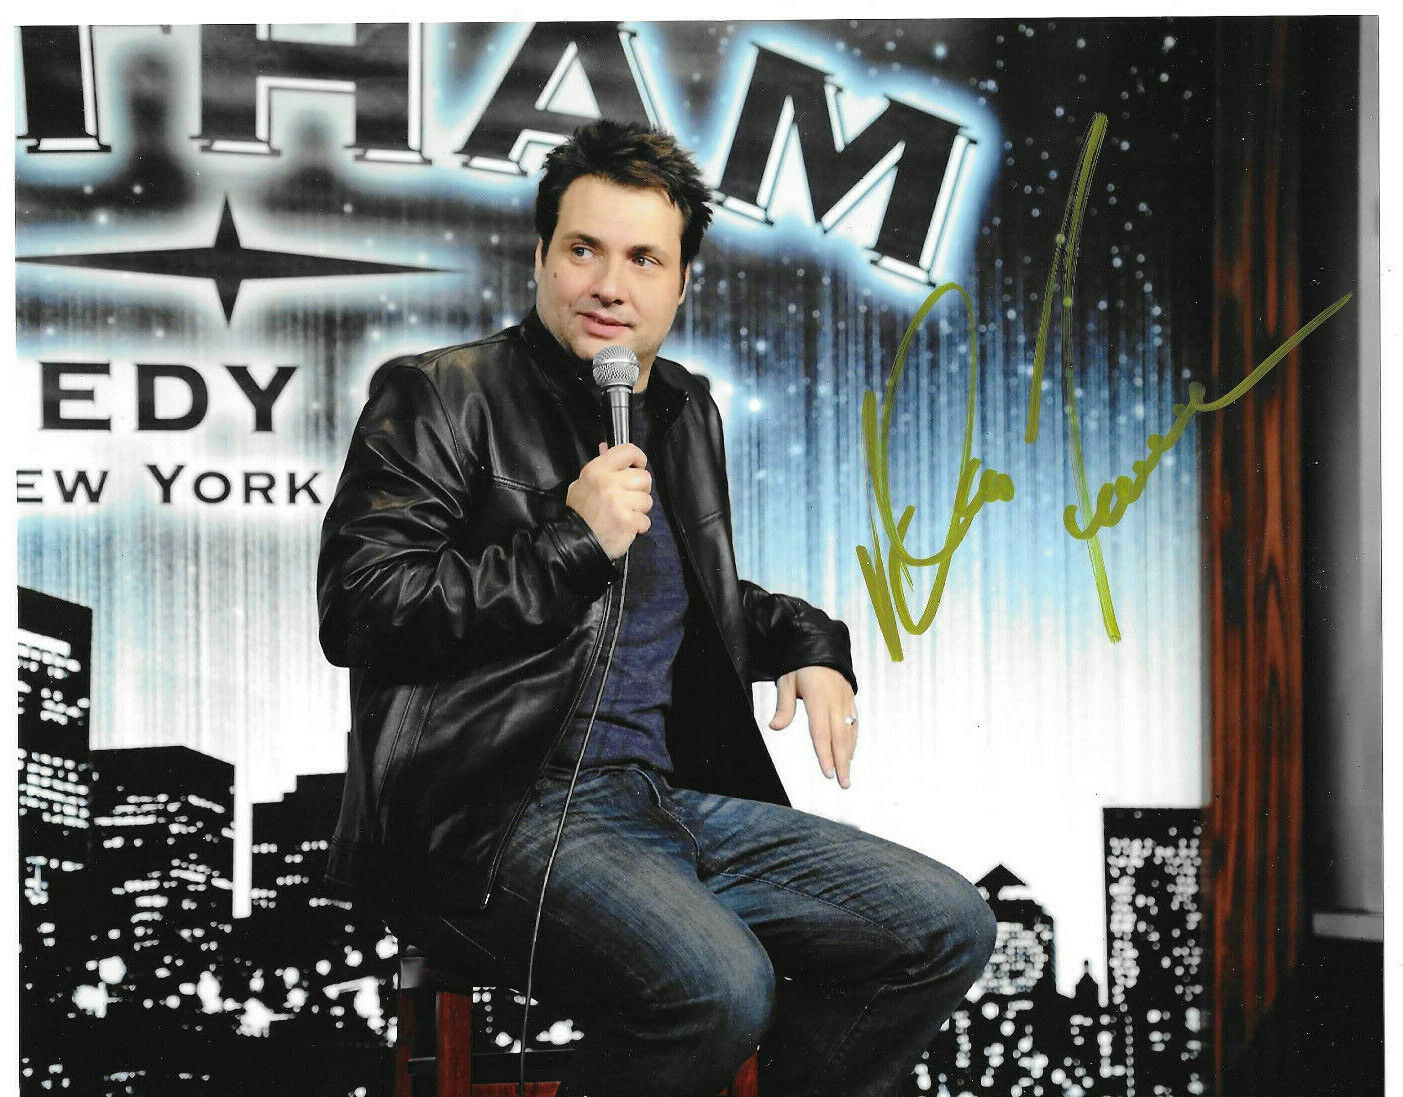 Adam Ferrara Authentic Signed 8x10 Photo Poster painting Autographed, Actor, Comedian